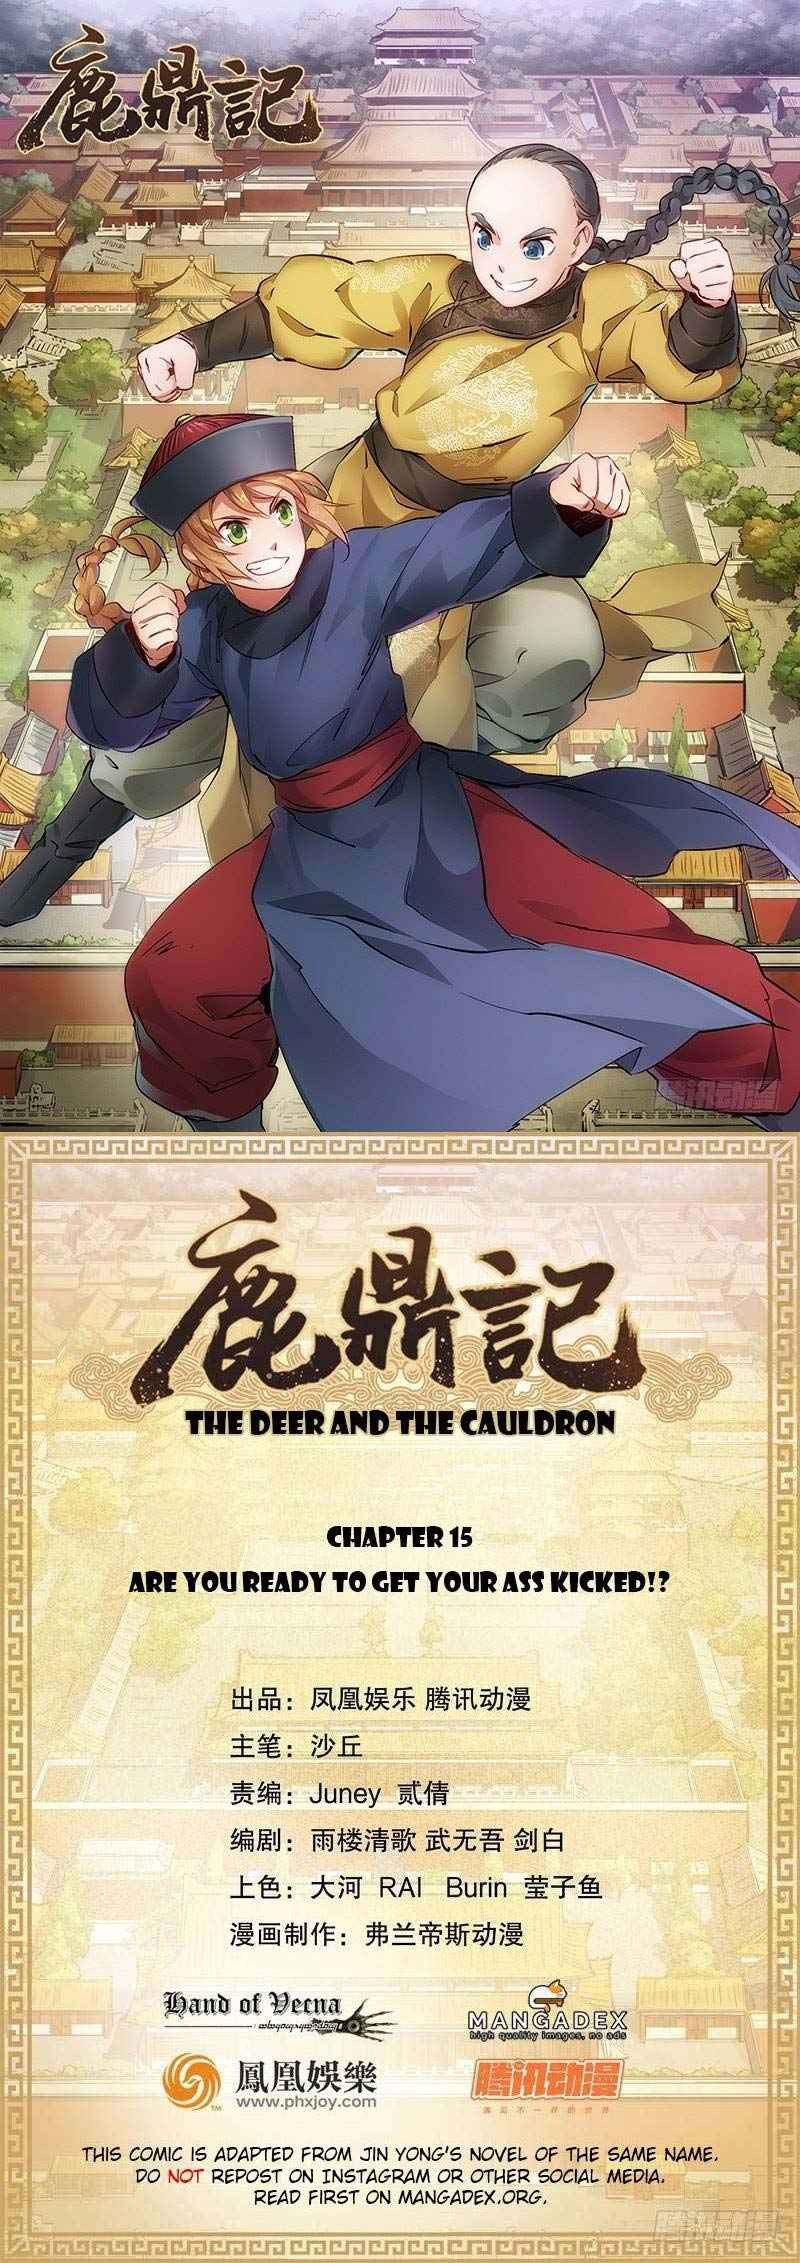 The Deer and the Cauldron Chapter 15